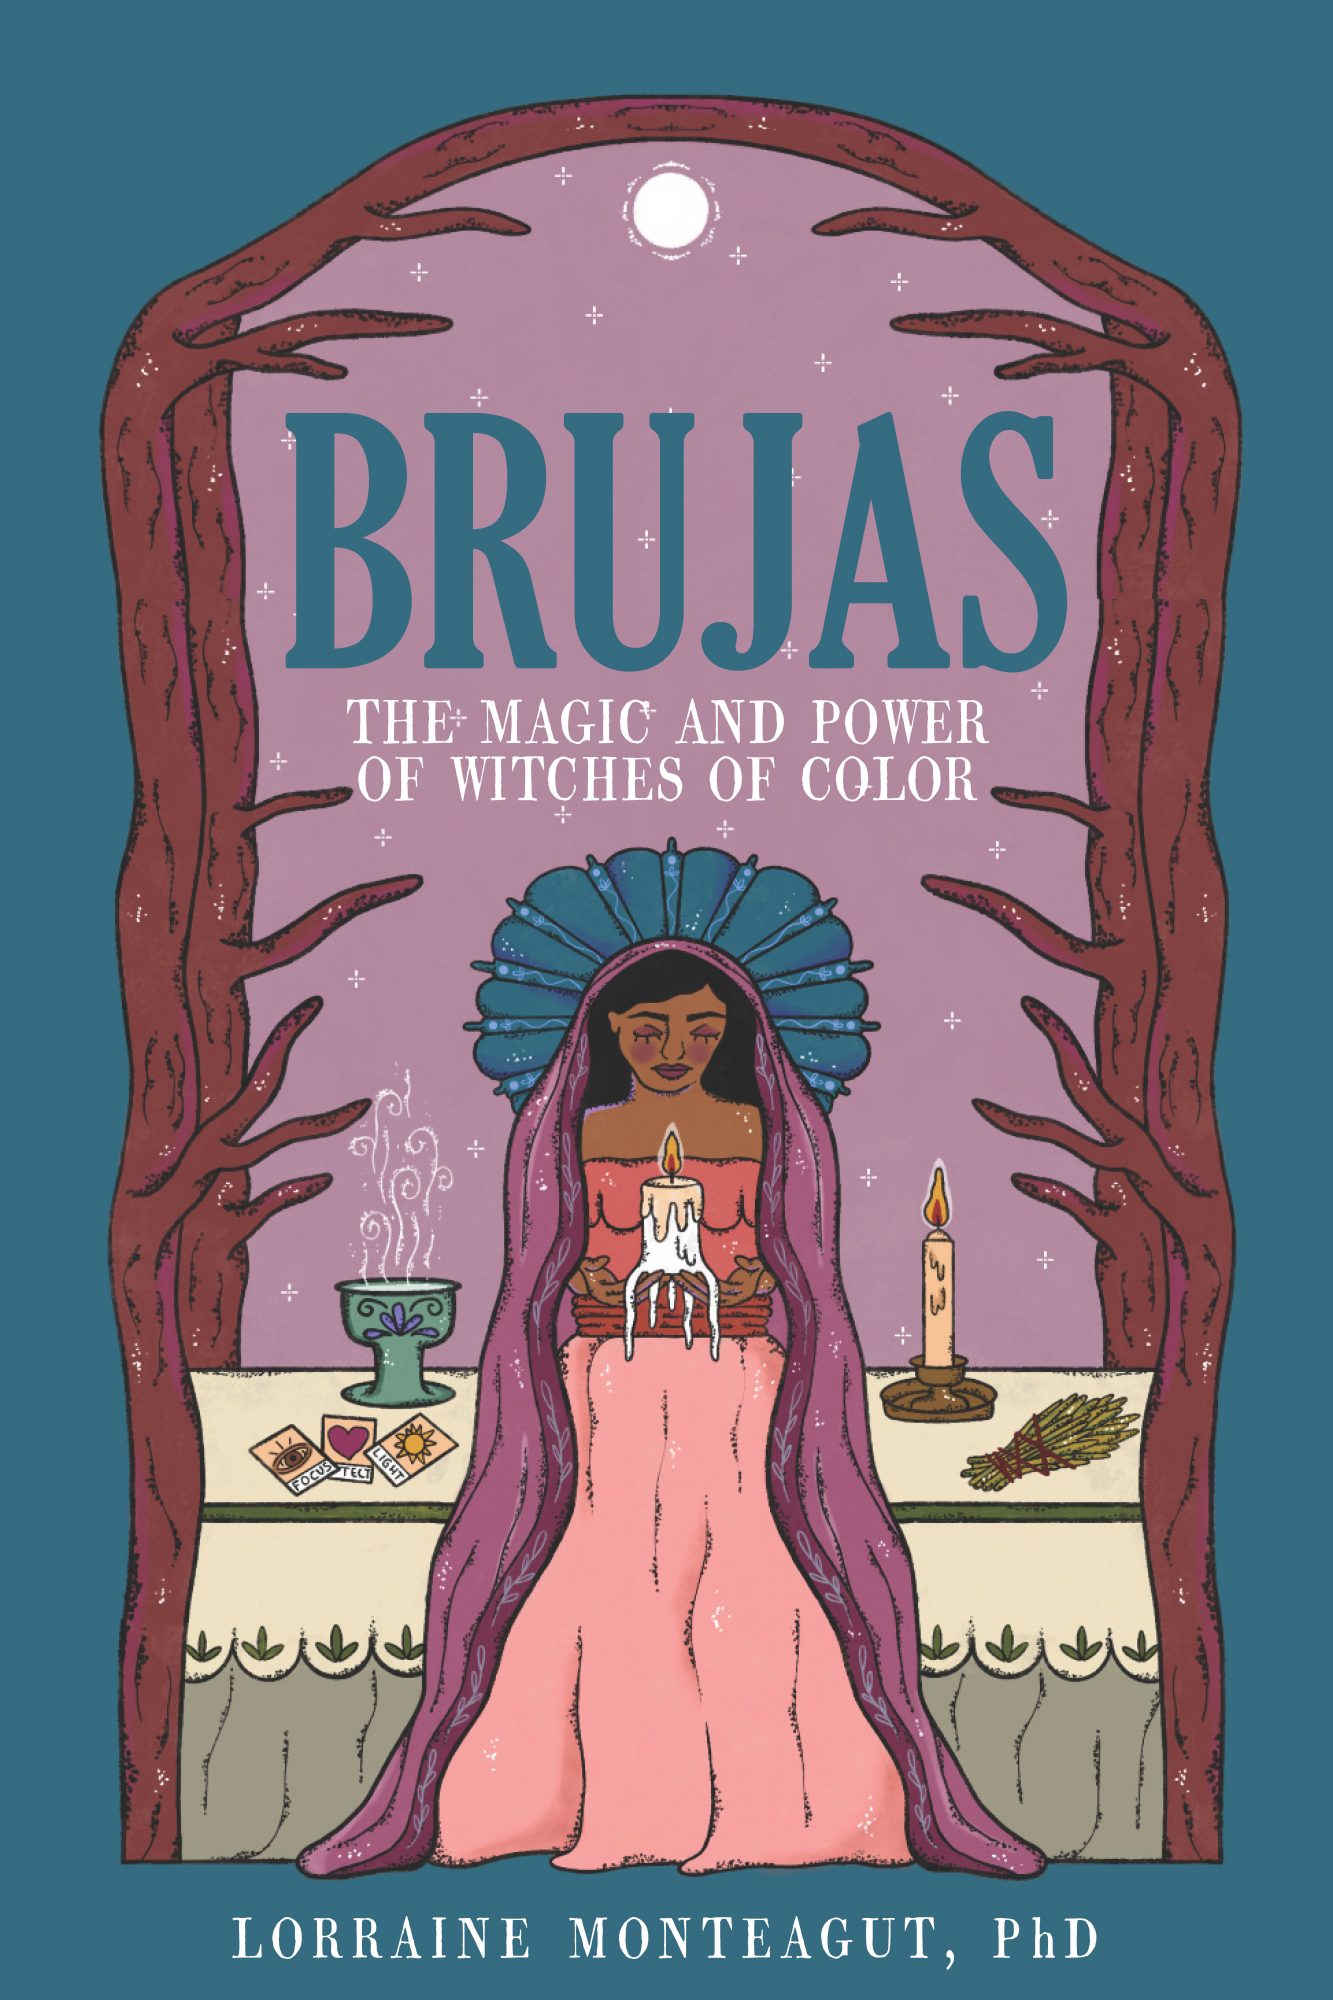 Image of the front cover of Brujas.